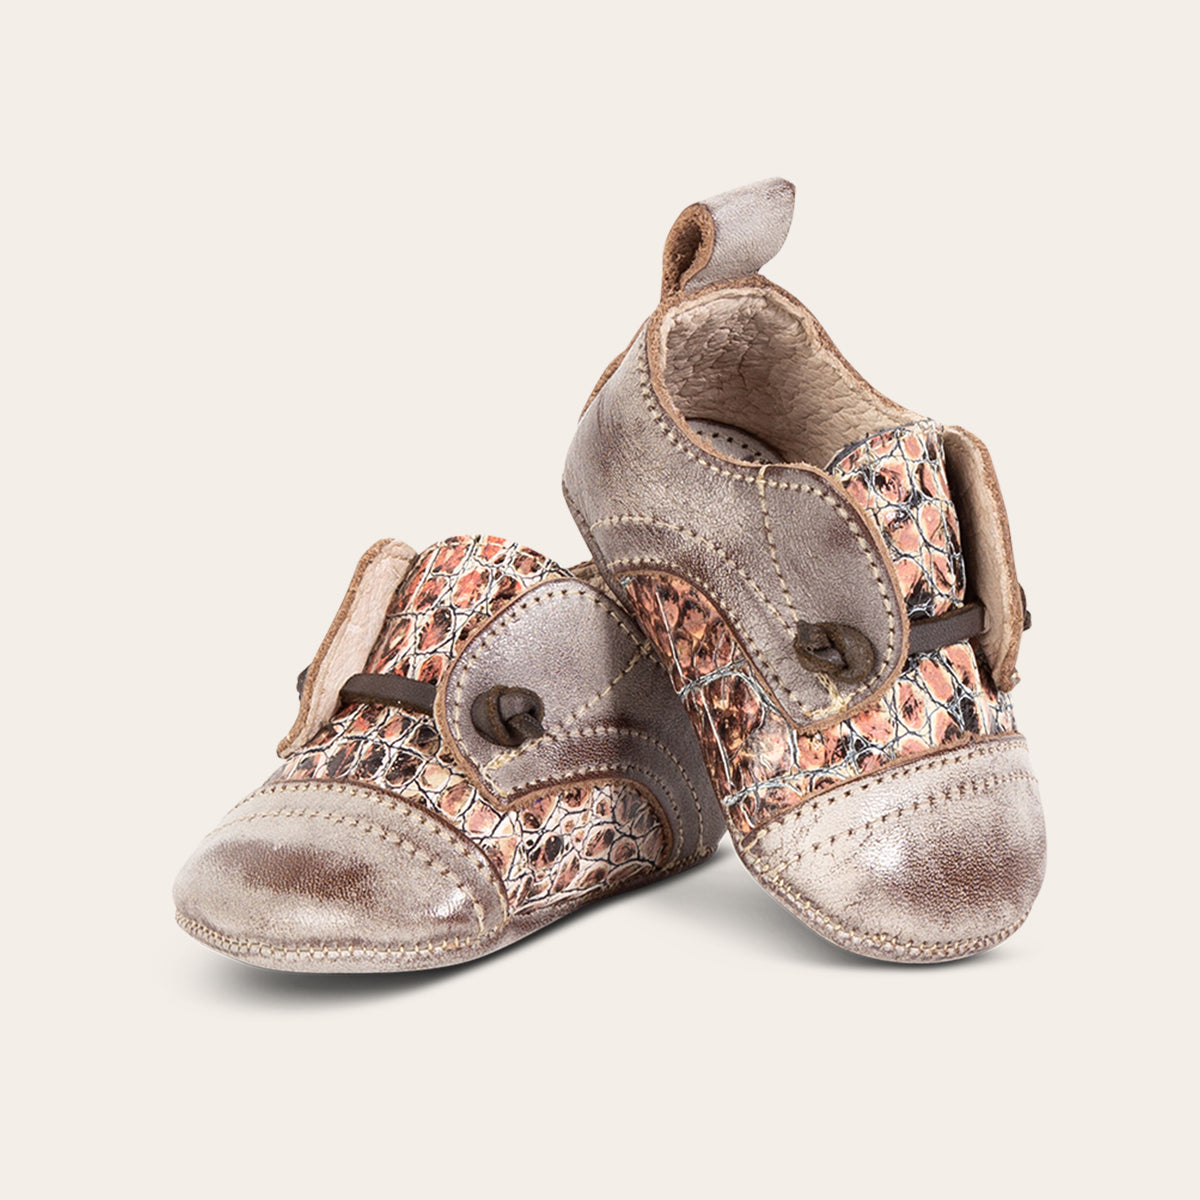 front view showing contrasting decorative knotted leather lace on FREEBIRD infant baby Mabel pink multi leather shoe